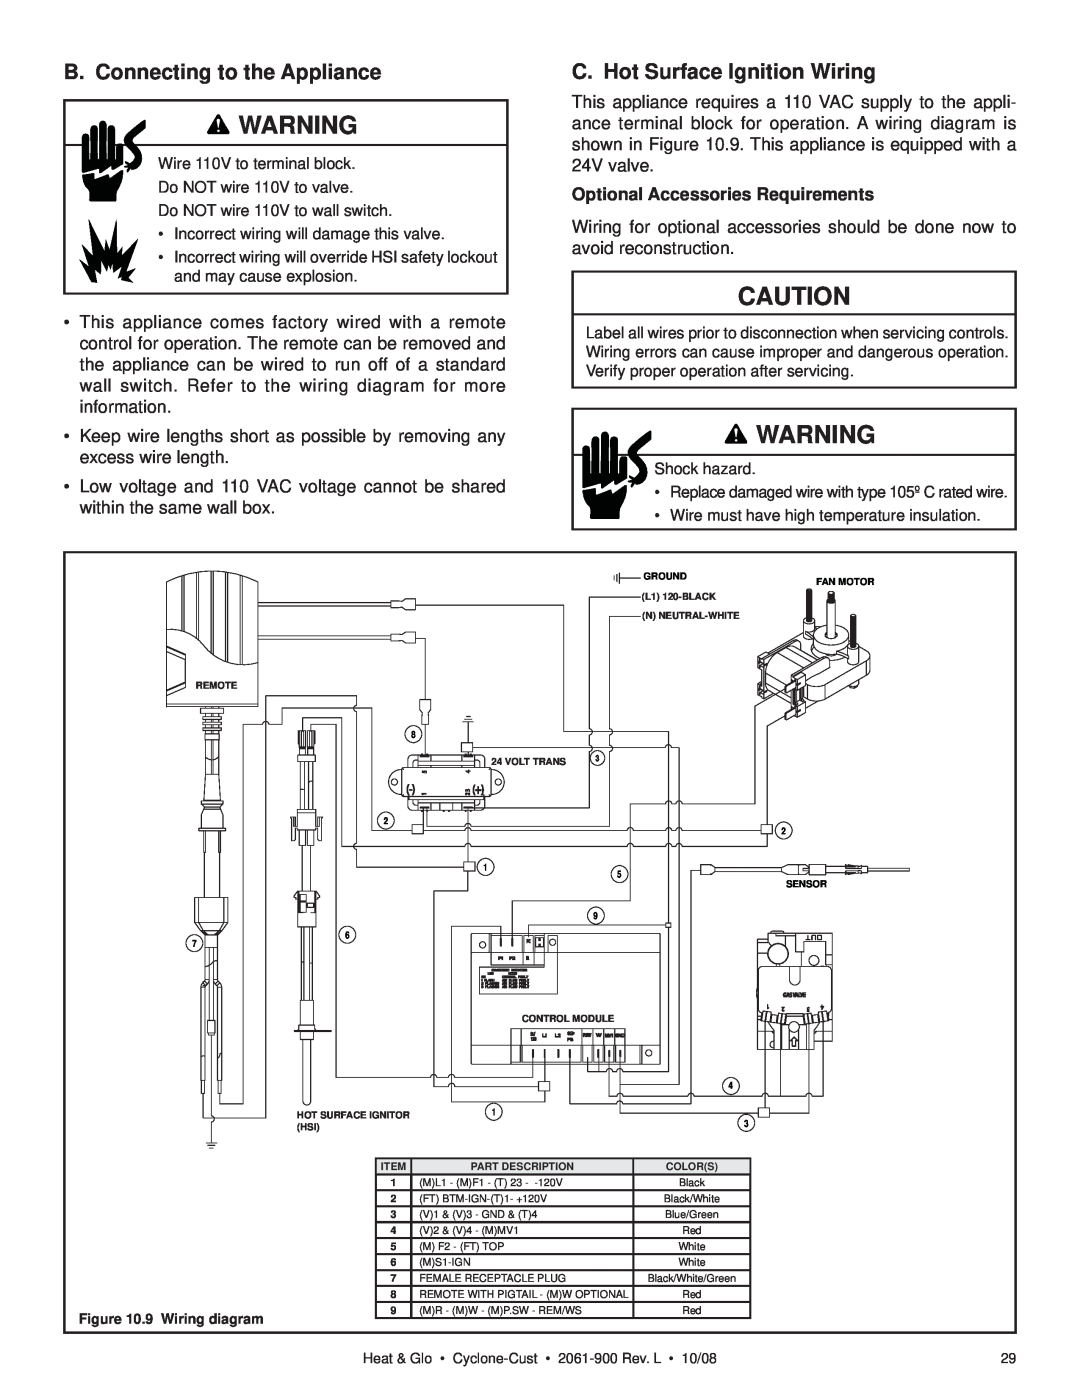 Hearth and Home Technologies Cyclone-Cust owner manual B. Connecting to the Appliance, C. Hot Surface Ignition Wiring 